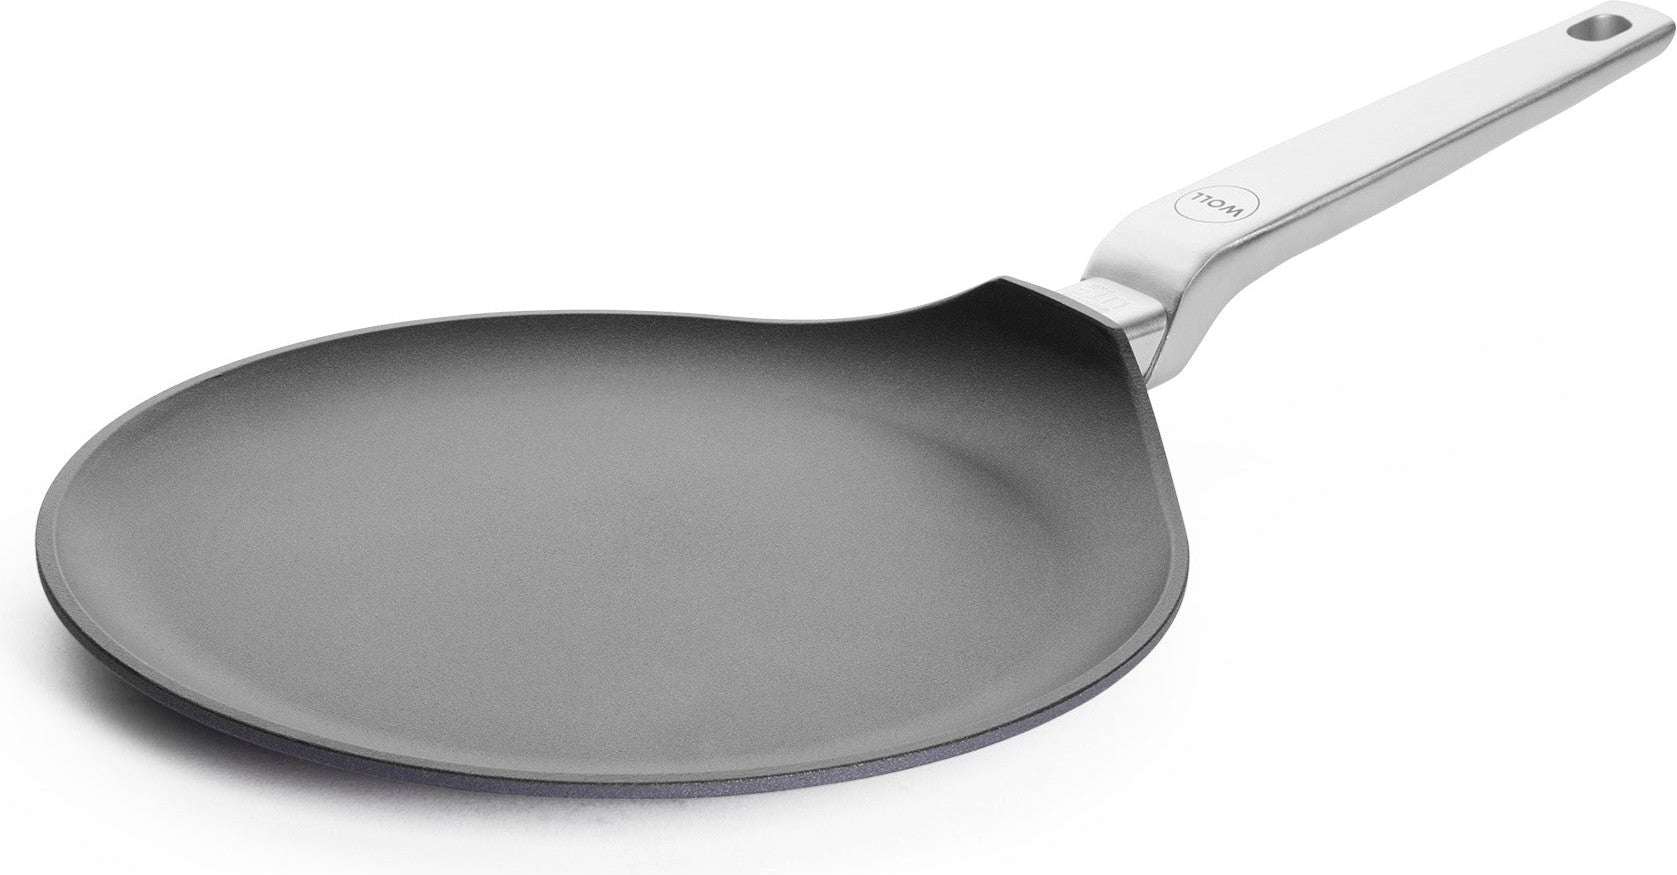 Woll - Diamond Lite Pro 7.9" Non-Stick Crepe Pan with Stainless Steel Handle (20 CM) - 2226DLPI